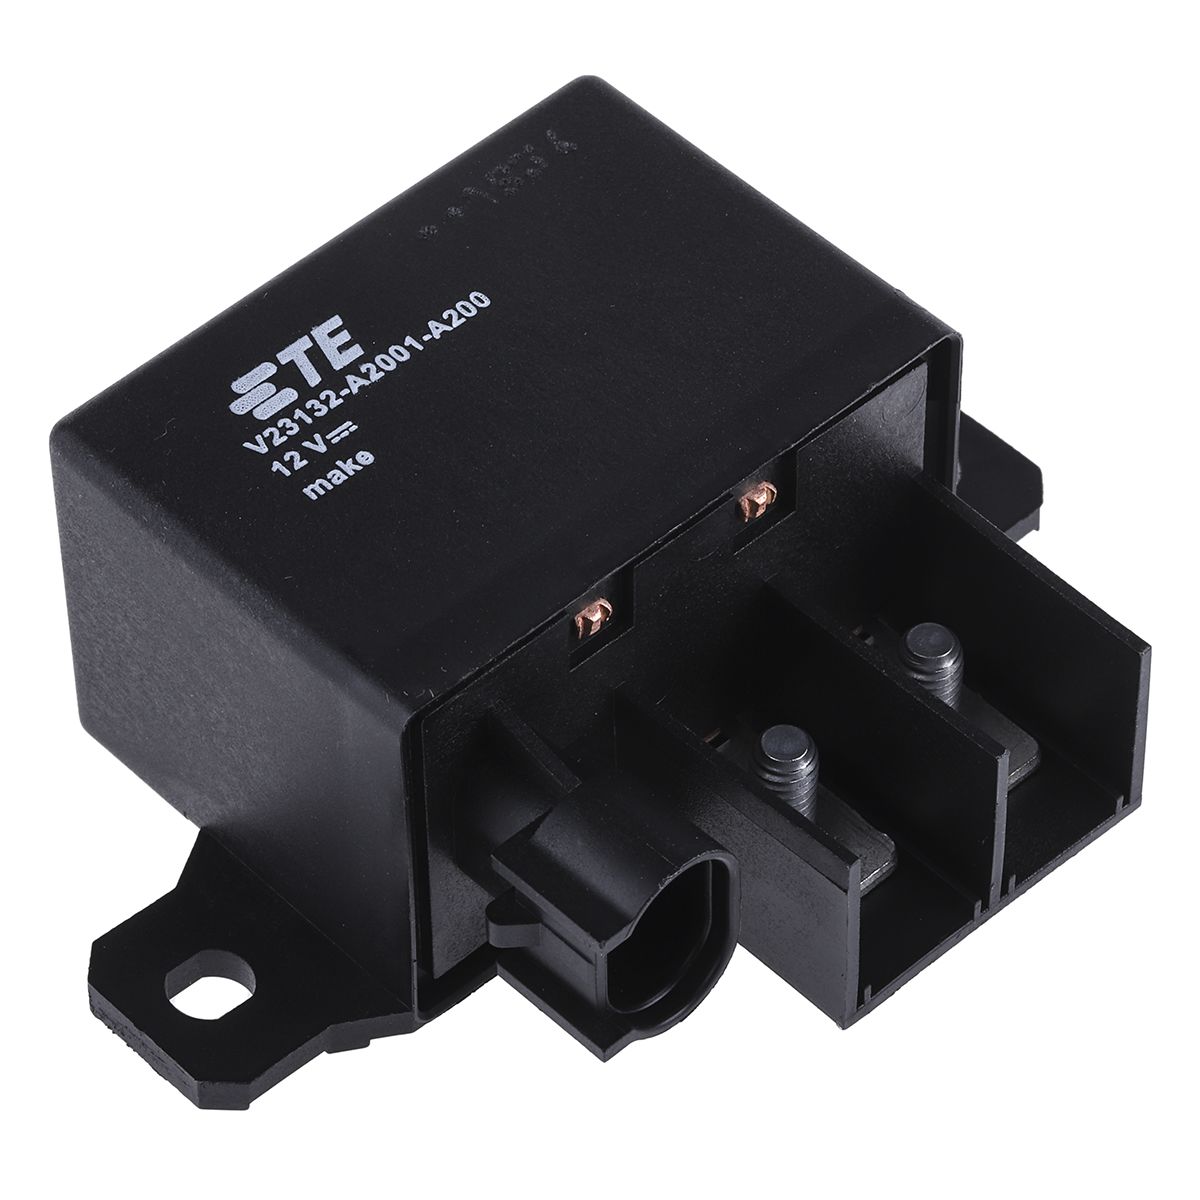 TE Connectivity Flange Mount Automotive Relay, 12V dc Coil Voltage, 300A Switching Current, SPNO